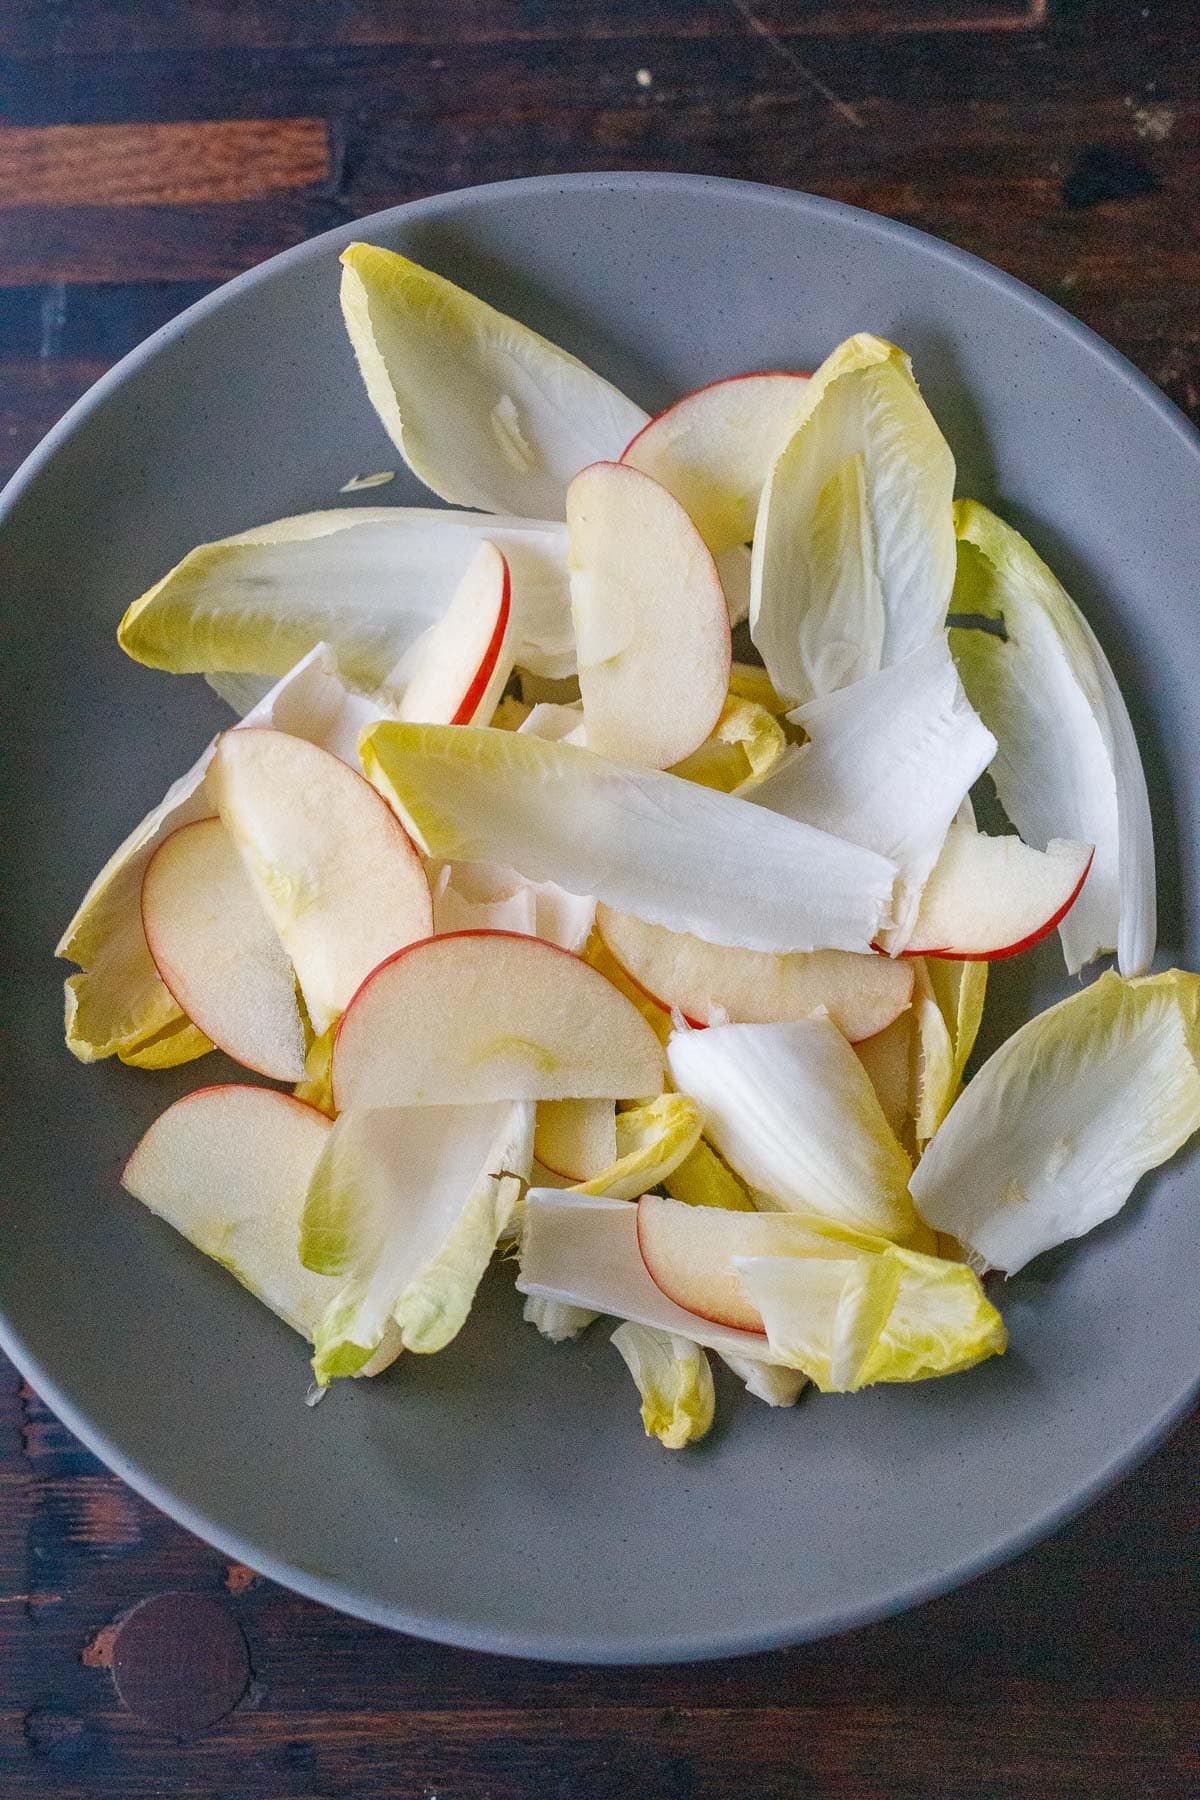 endive leaves and sliced apples in bowl